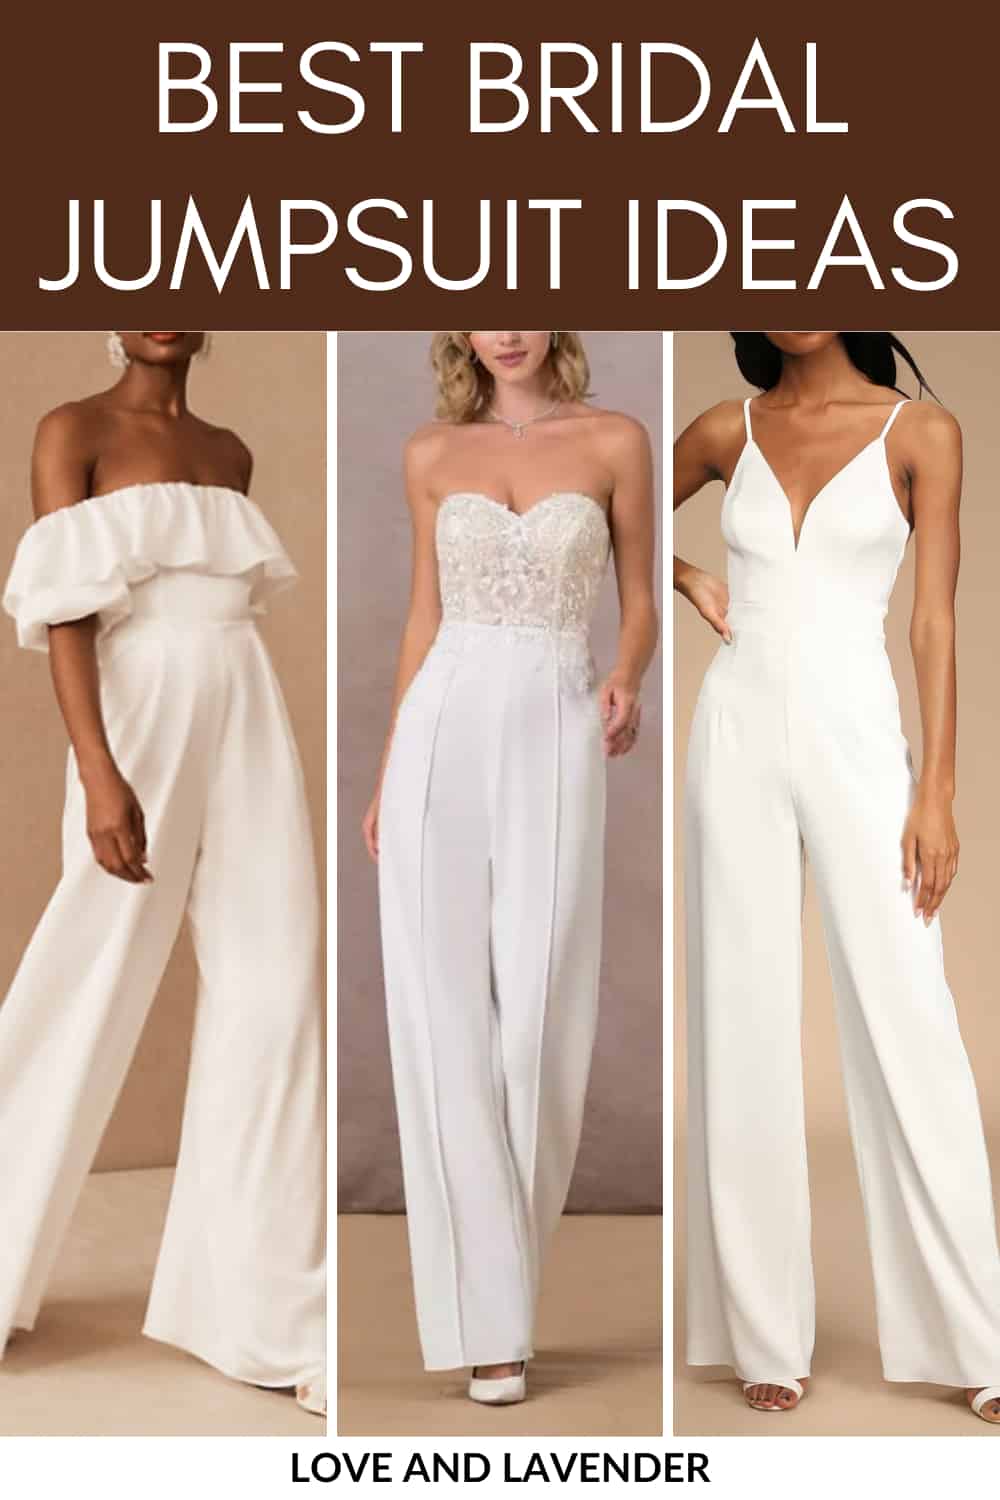 Pinterest pin - Wedding Jumpsuits Are The New White Dress